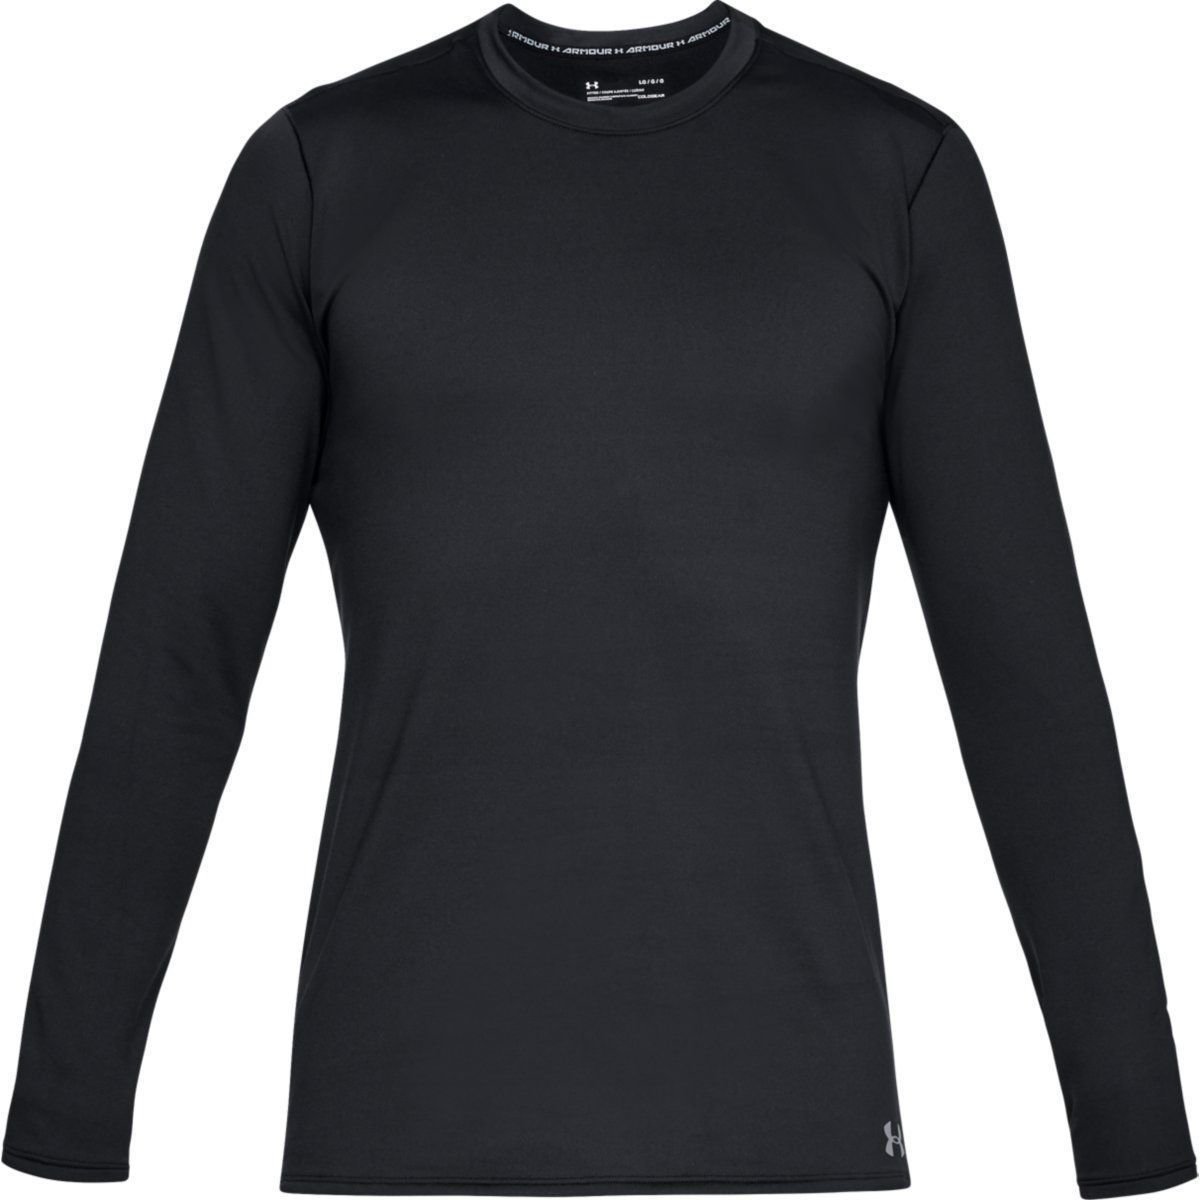 Thermal Clothing Under Armour Fitted CG Crew Black L